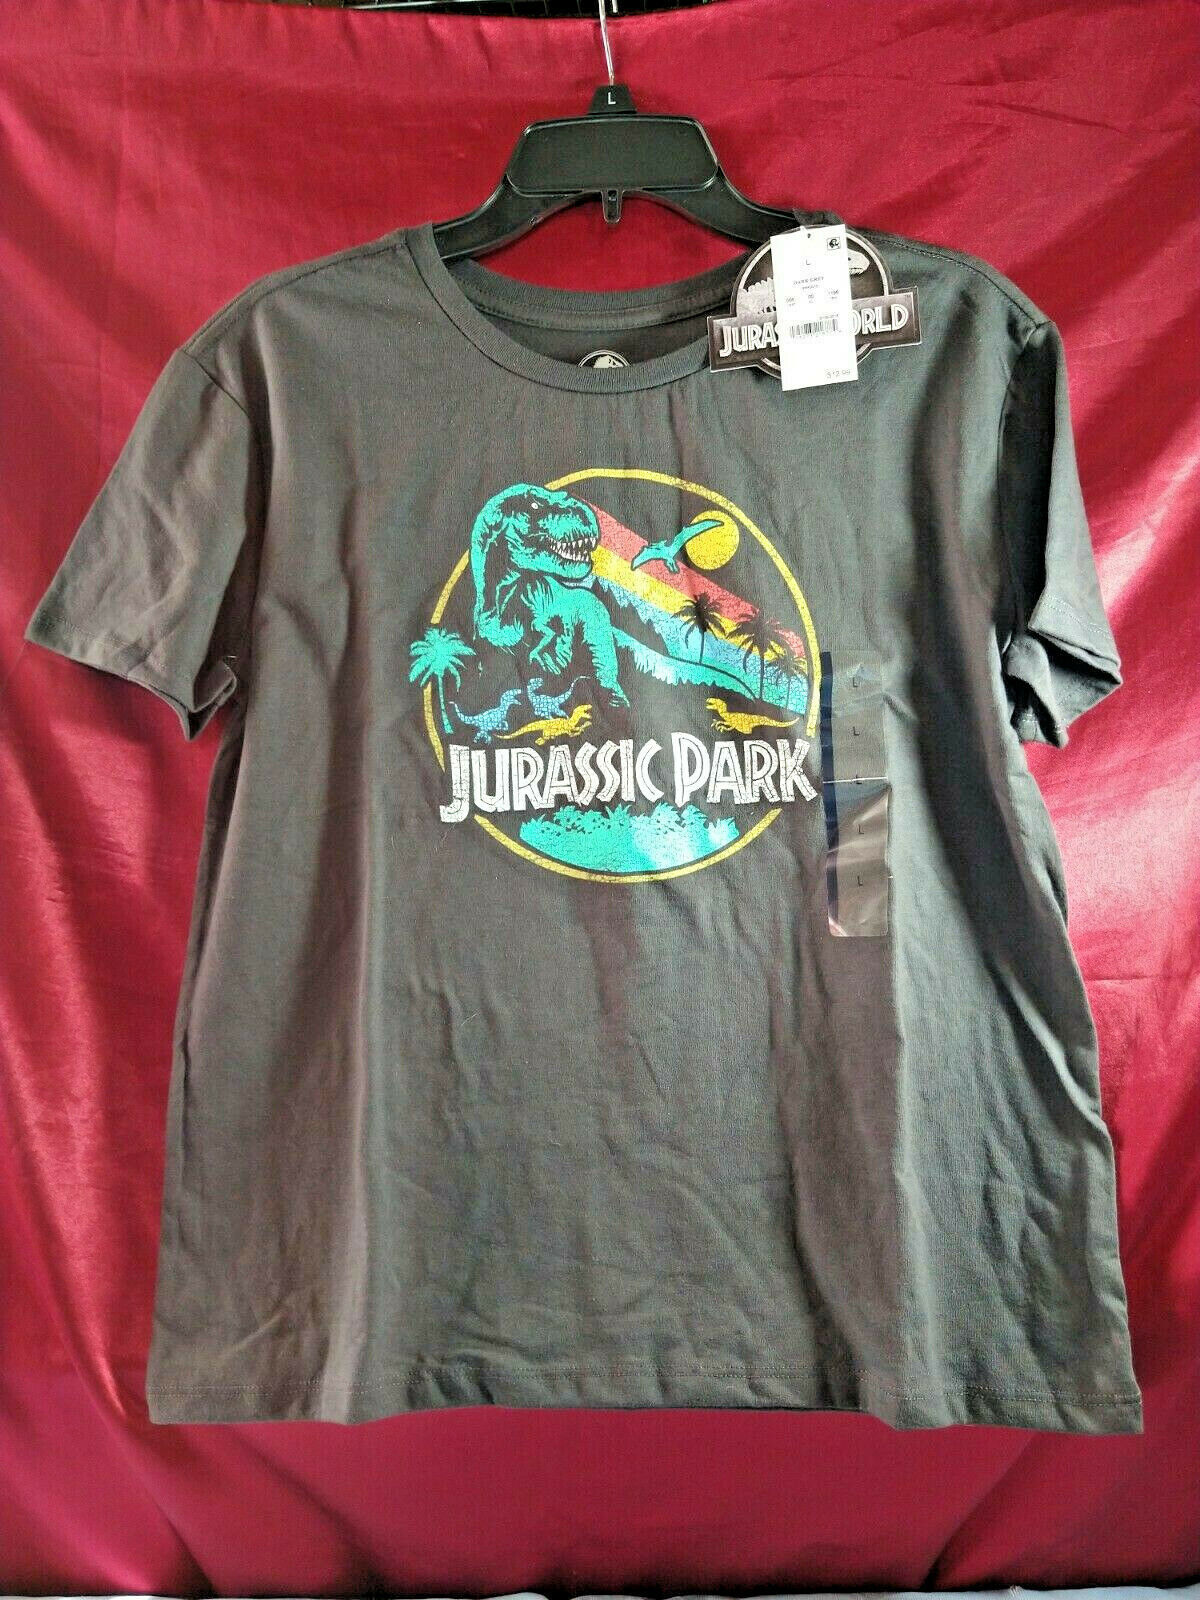 Primary image for T-Rex Jurassic Park Retro dinosaur T-Shirt youth teen Size L large